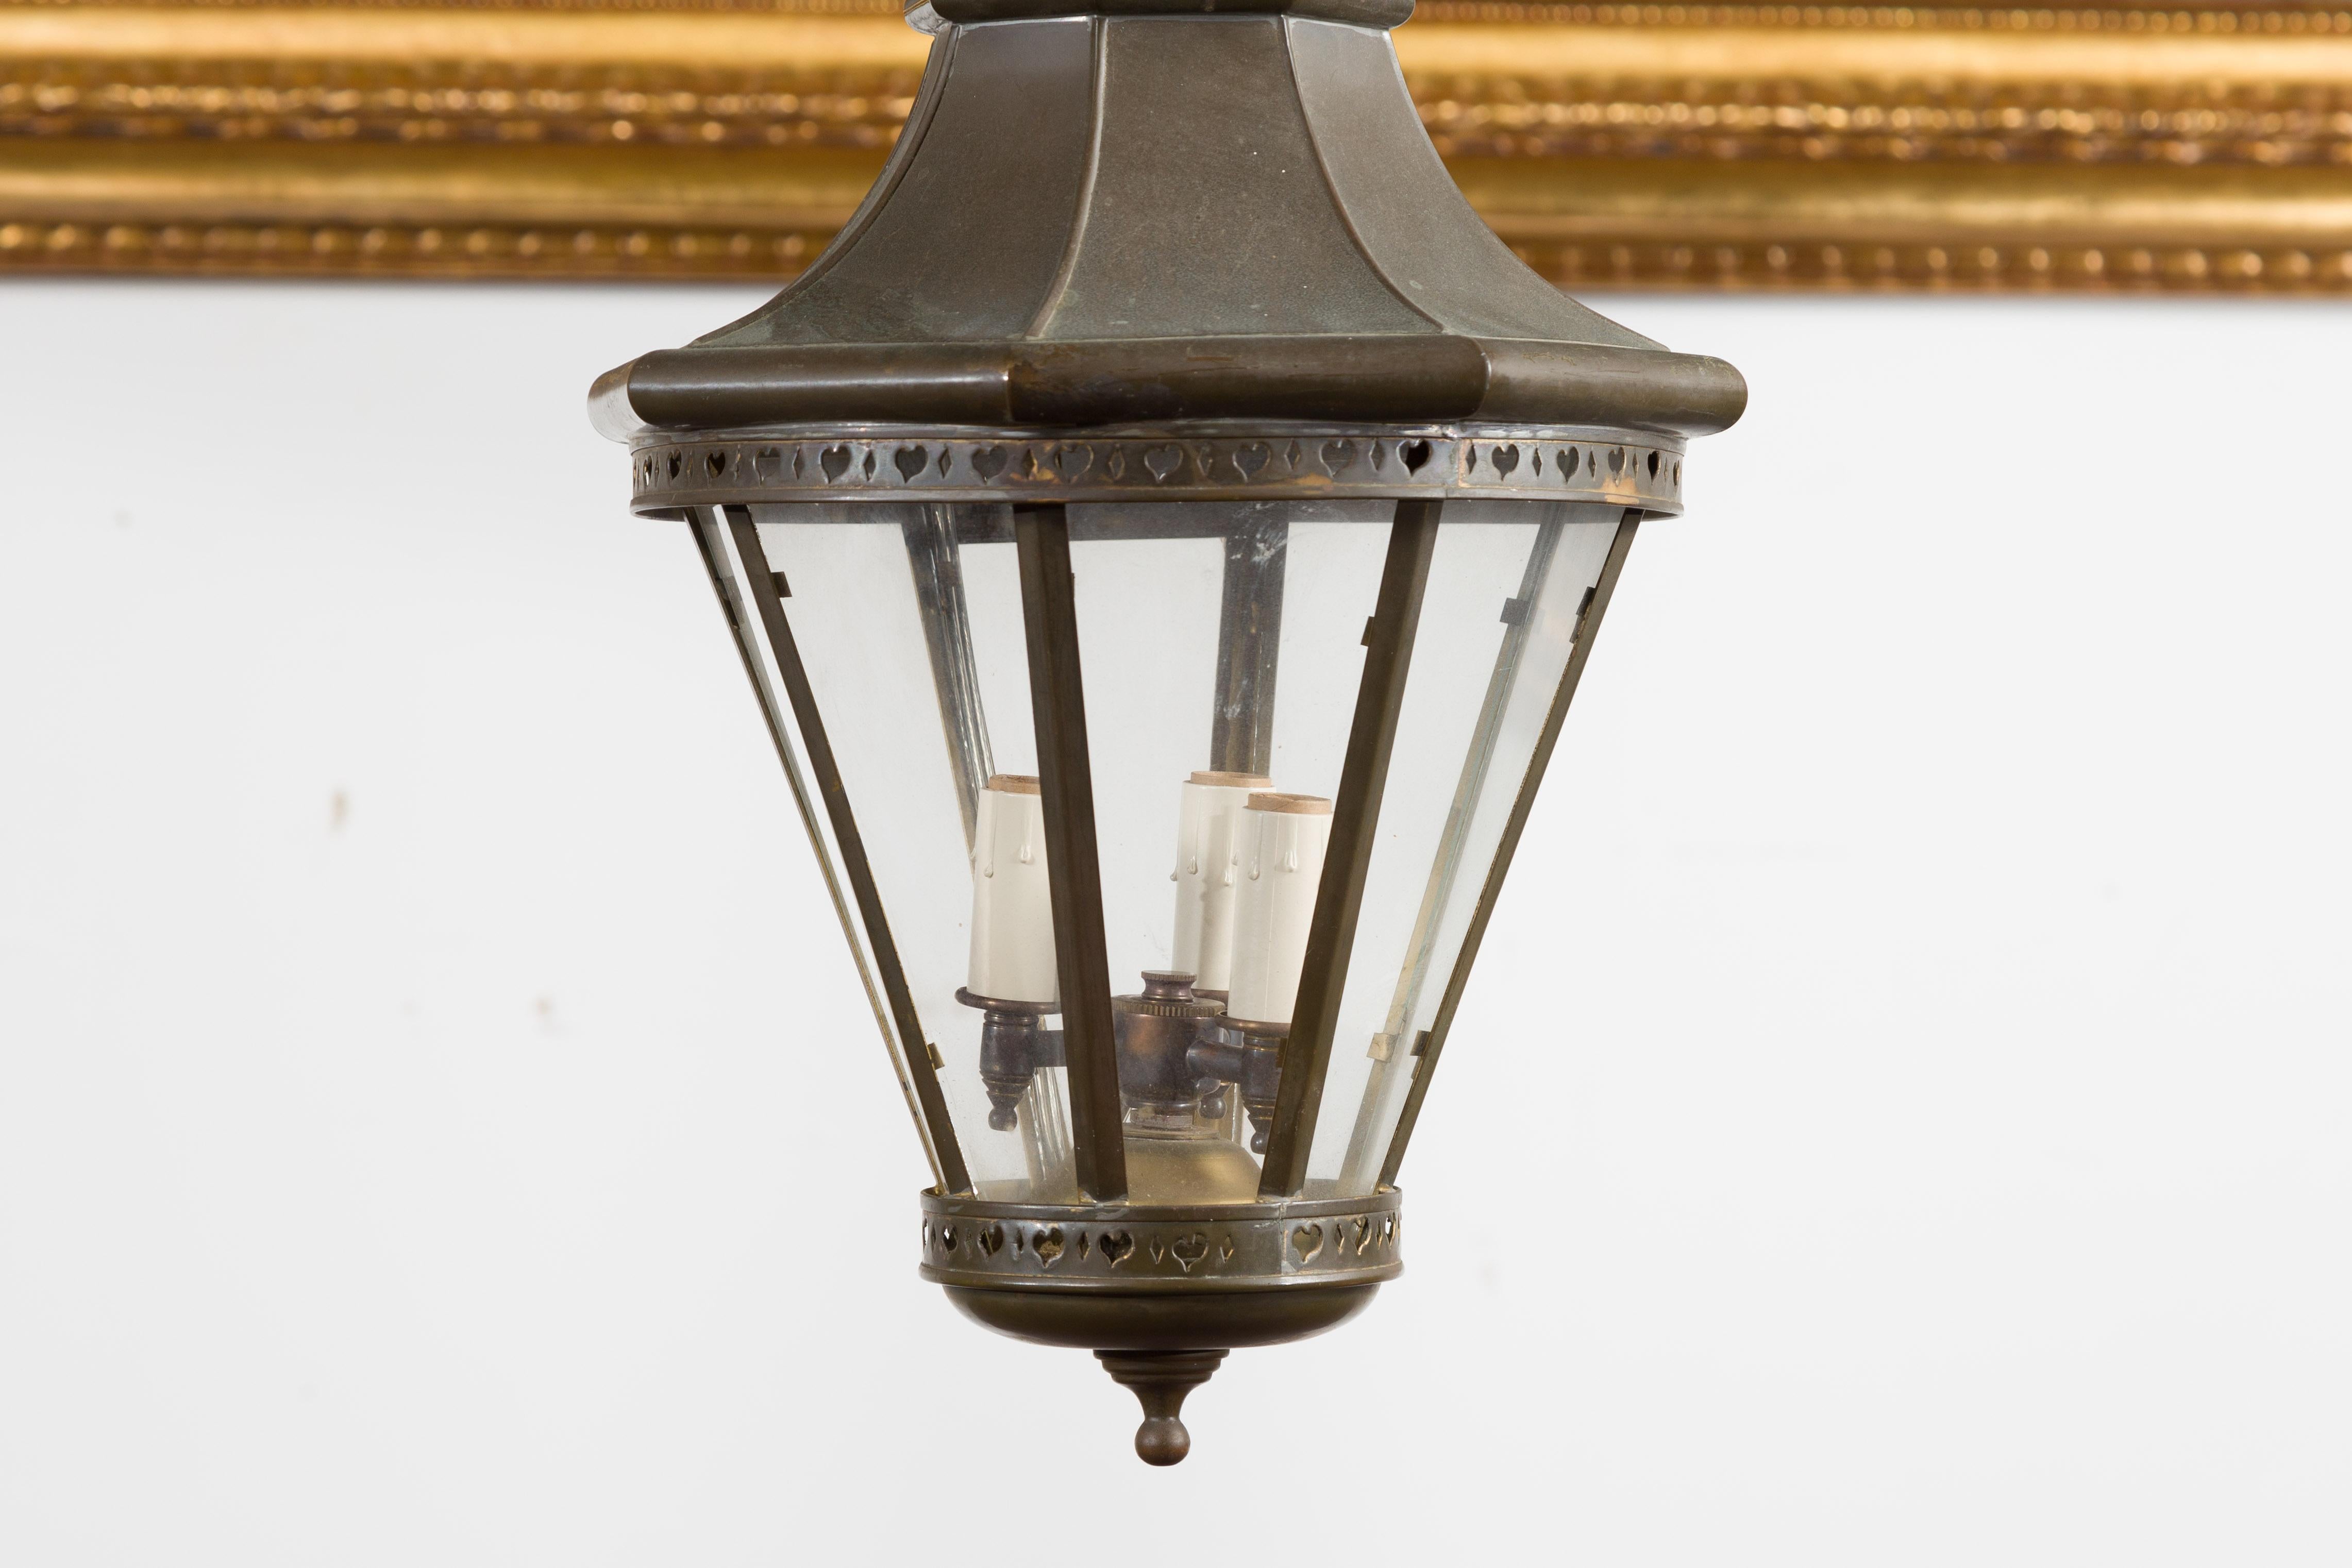 20th Century Petite English Turn of the Century Copper and Glass Lantern with Three Lights